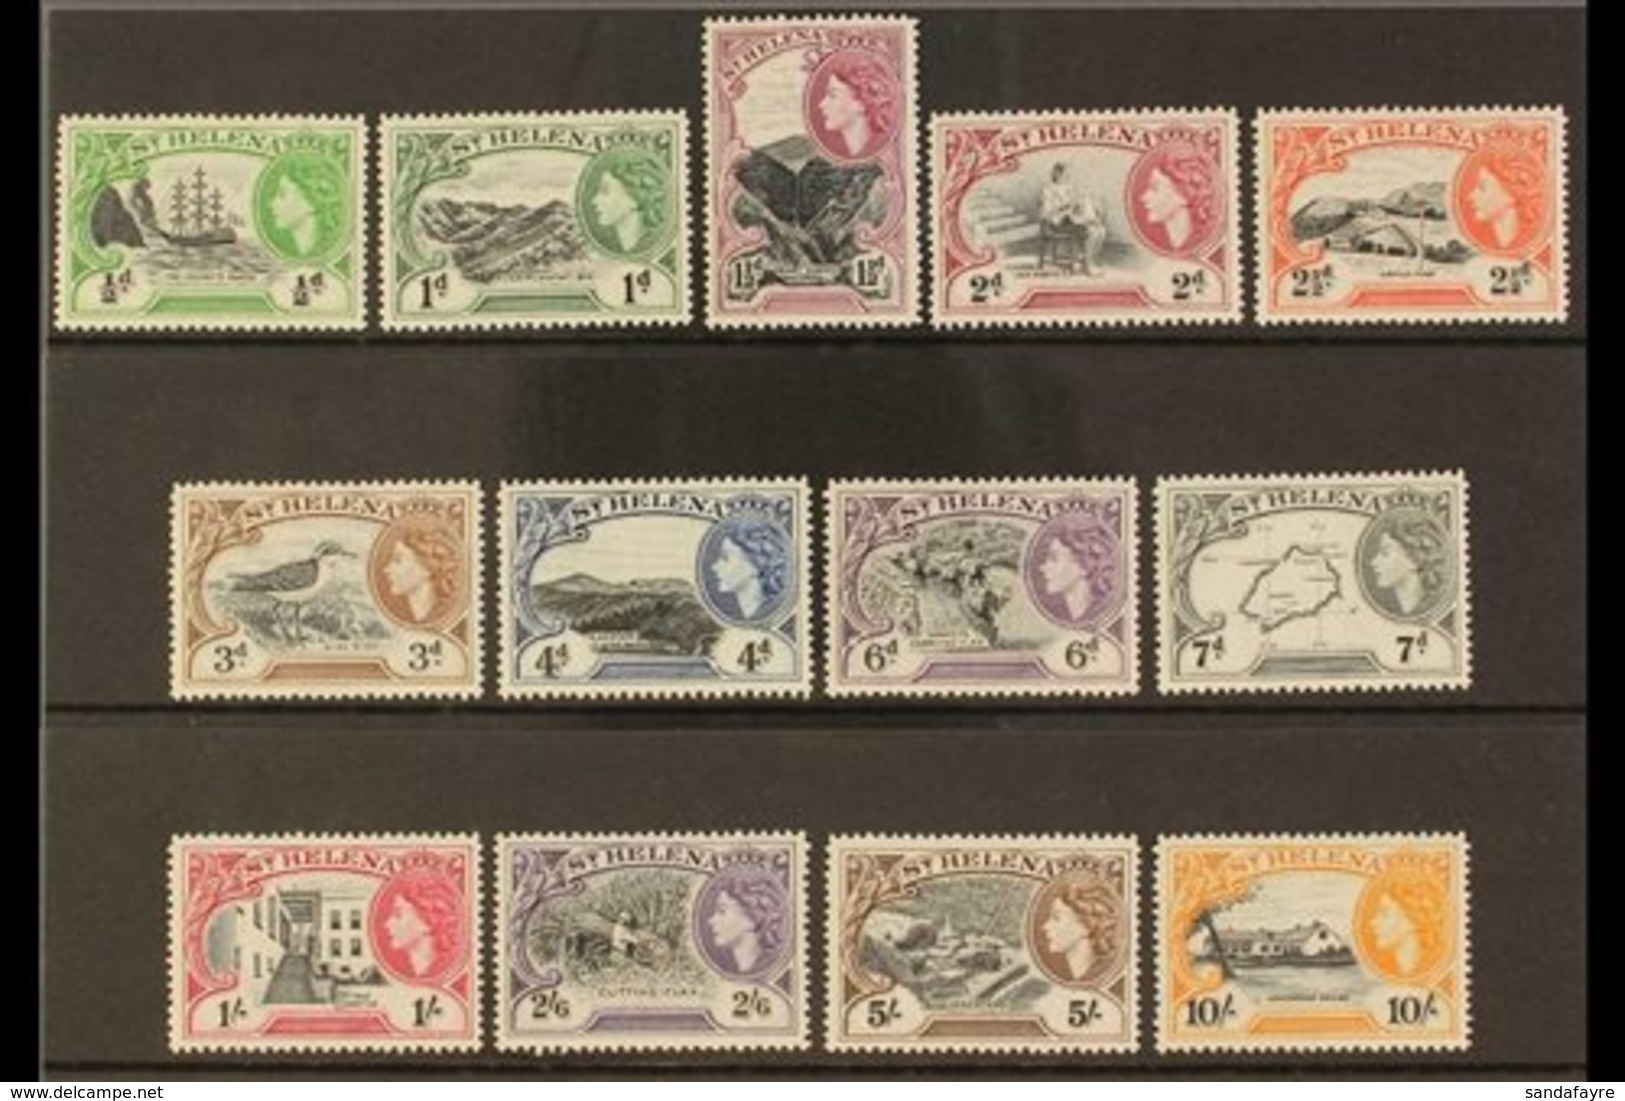 1953-59  Pictorials Complete Set, SG 153/65, Never Hinged Mint, Very Fresh. (13 Stamps) For More Images, Please Visit Ht - St. Helena